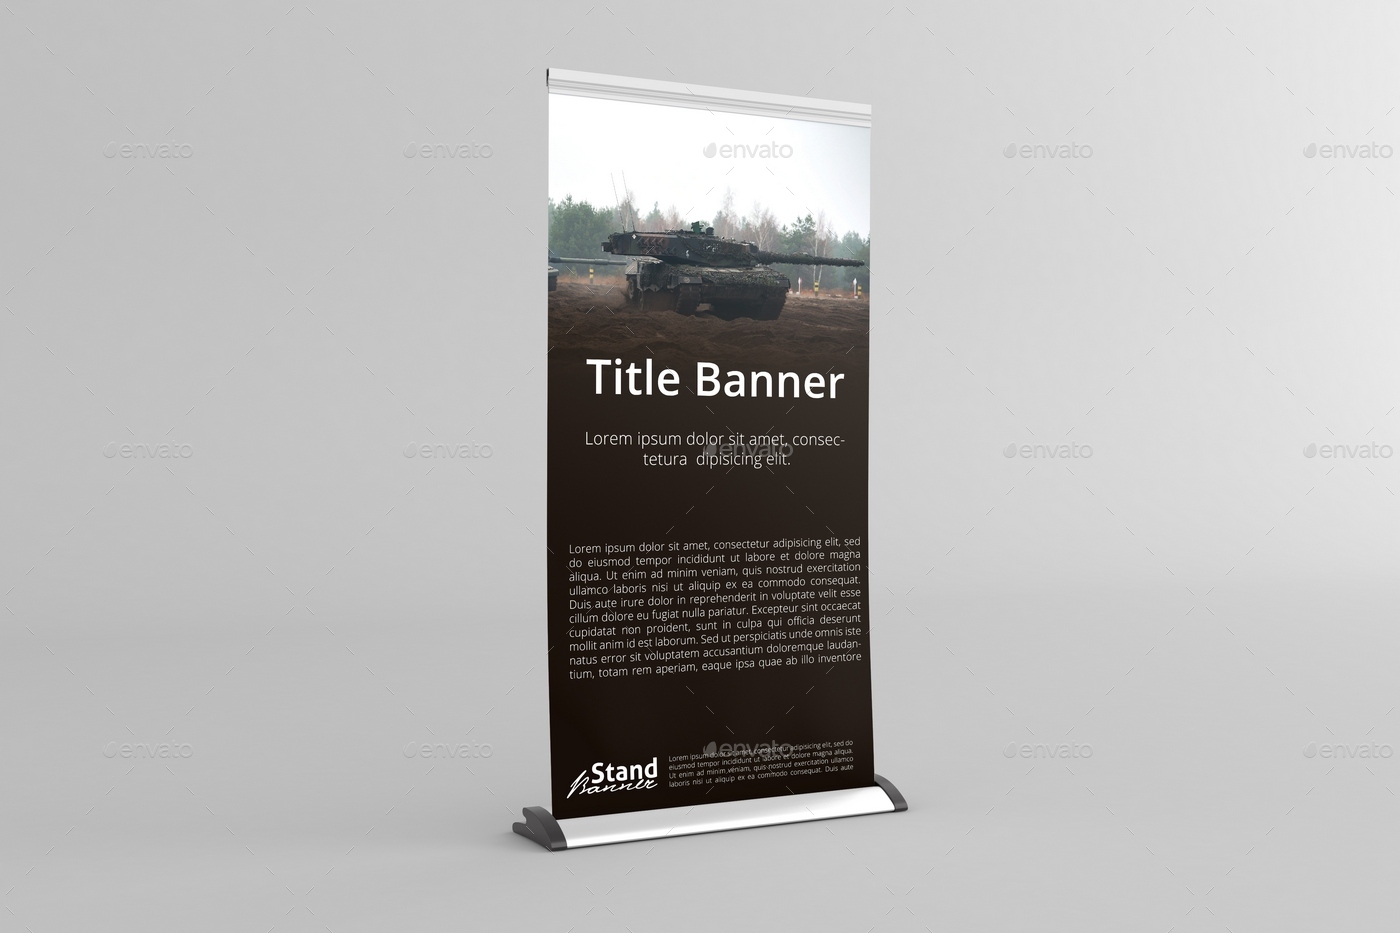 Download Retractable - Roll Up Banner Stand Mock-Up by MassDream | GraphicRiver